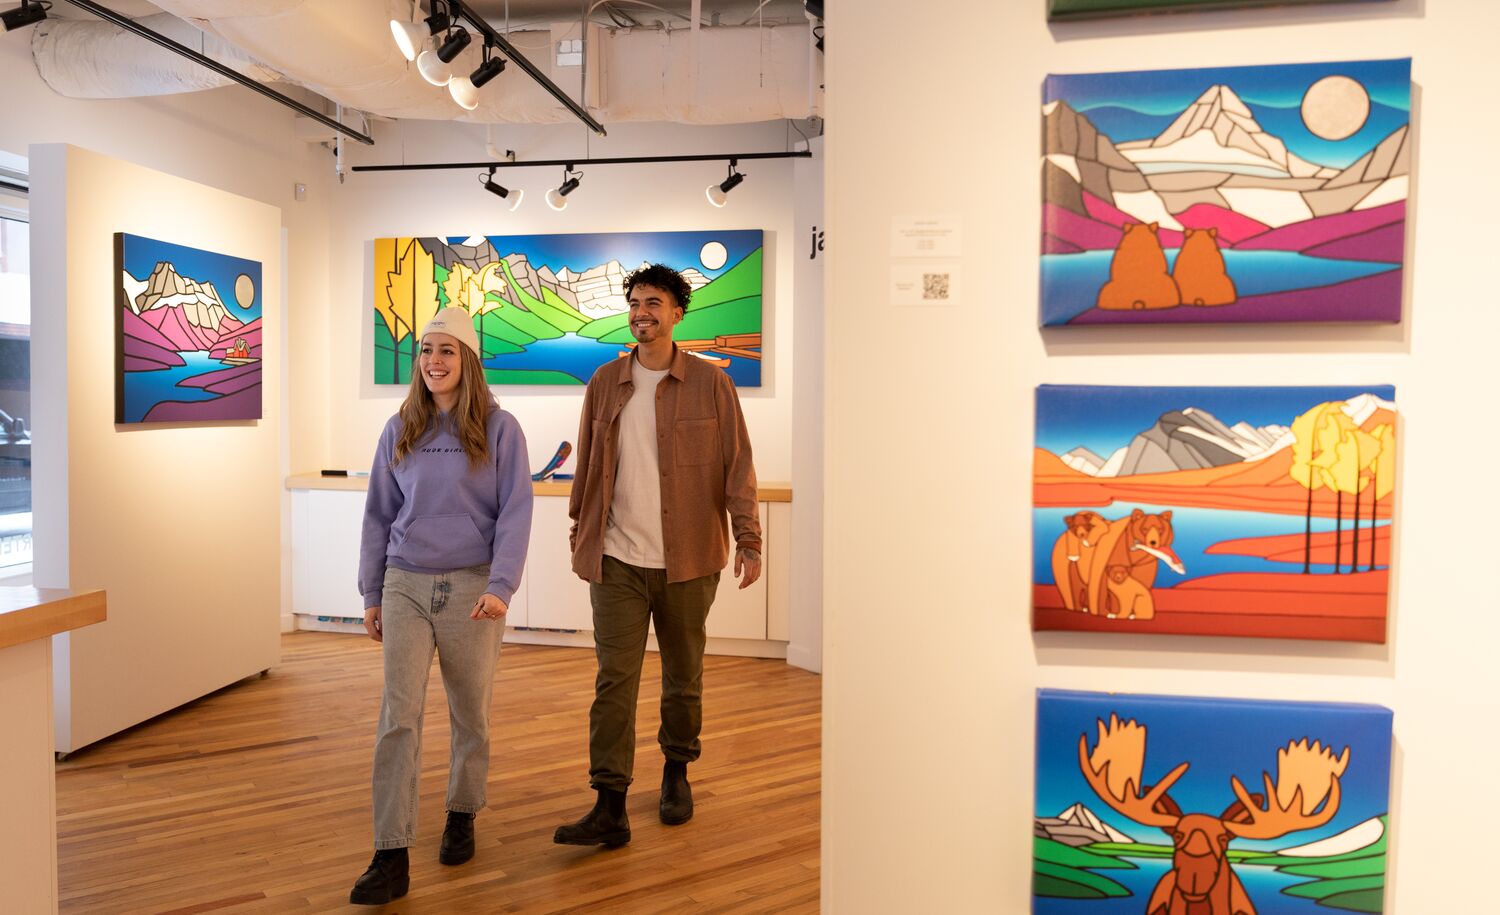 Two people walk through the Carter Ryan Gallery in Banff.